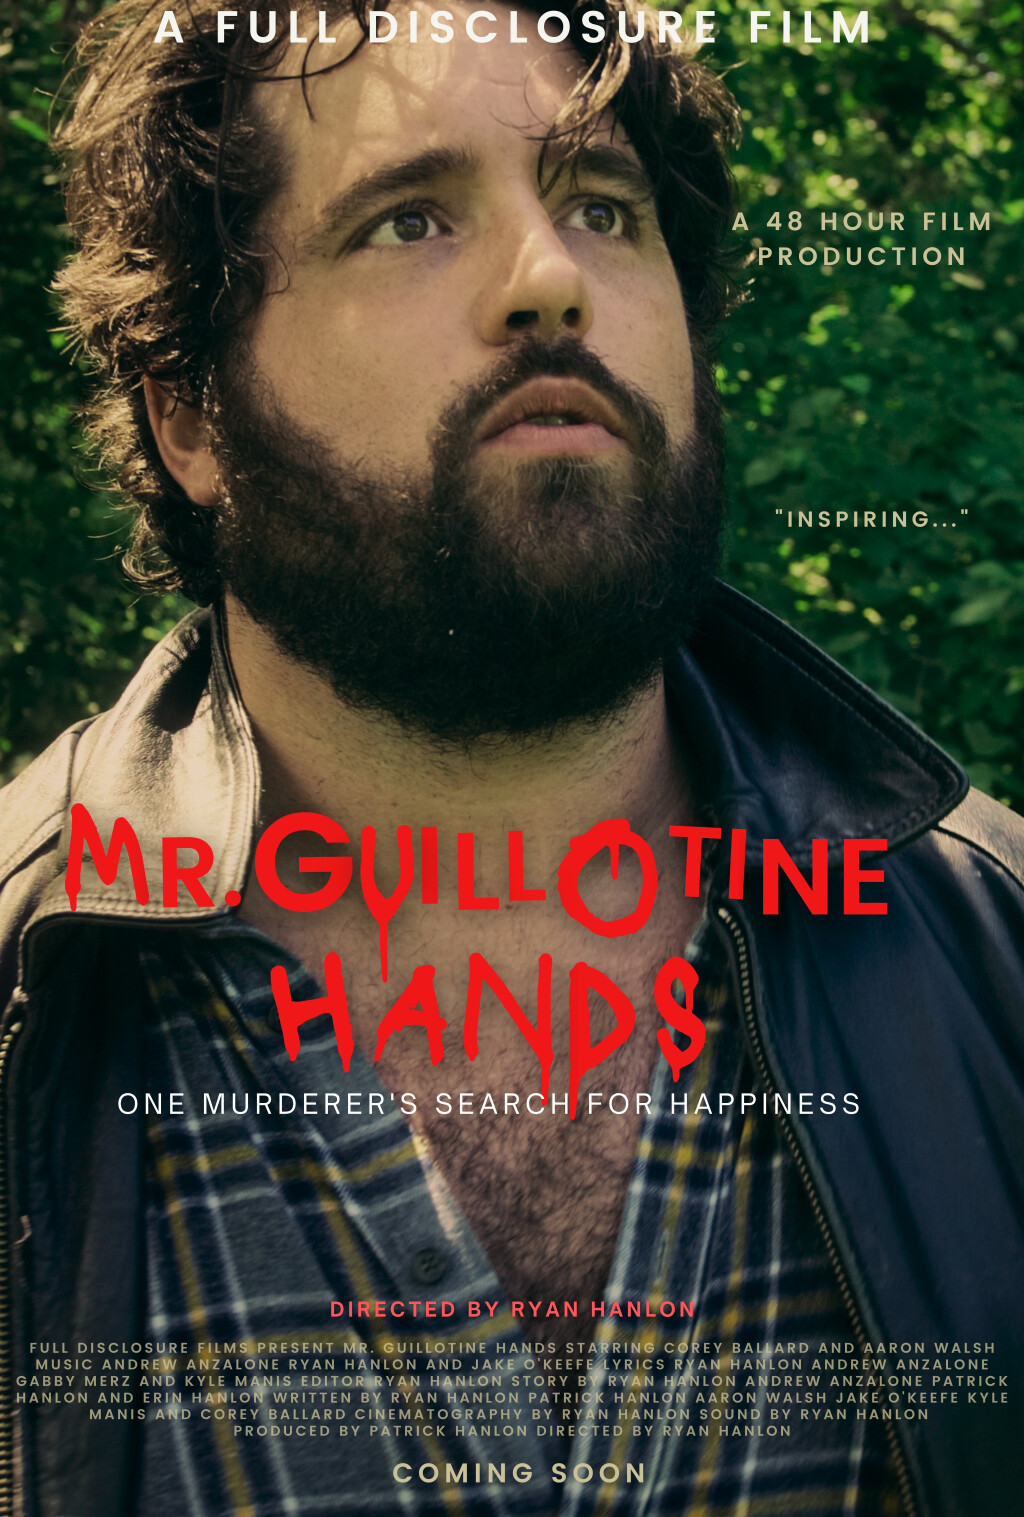 Filmposter for Mr. Guillotine Hands